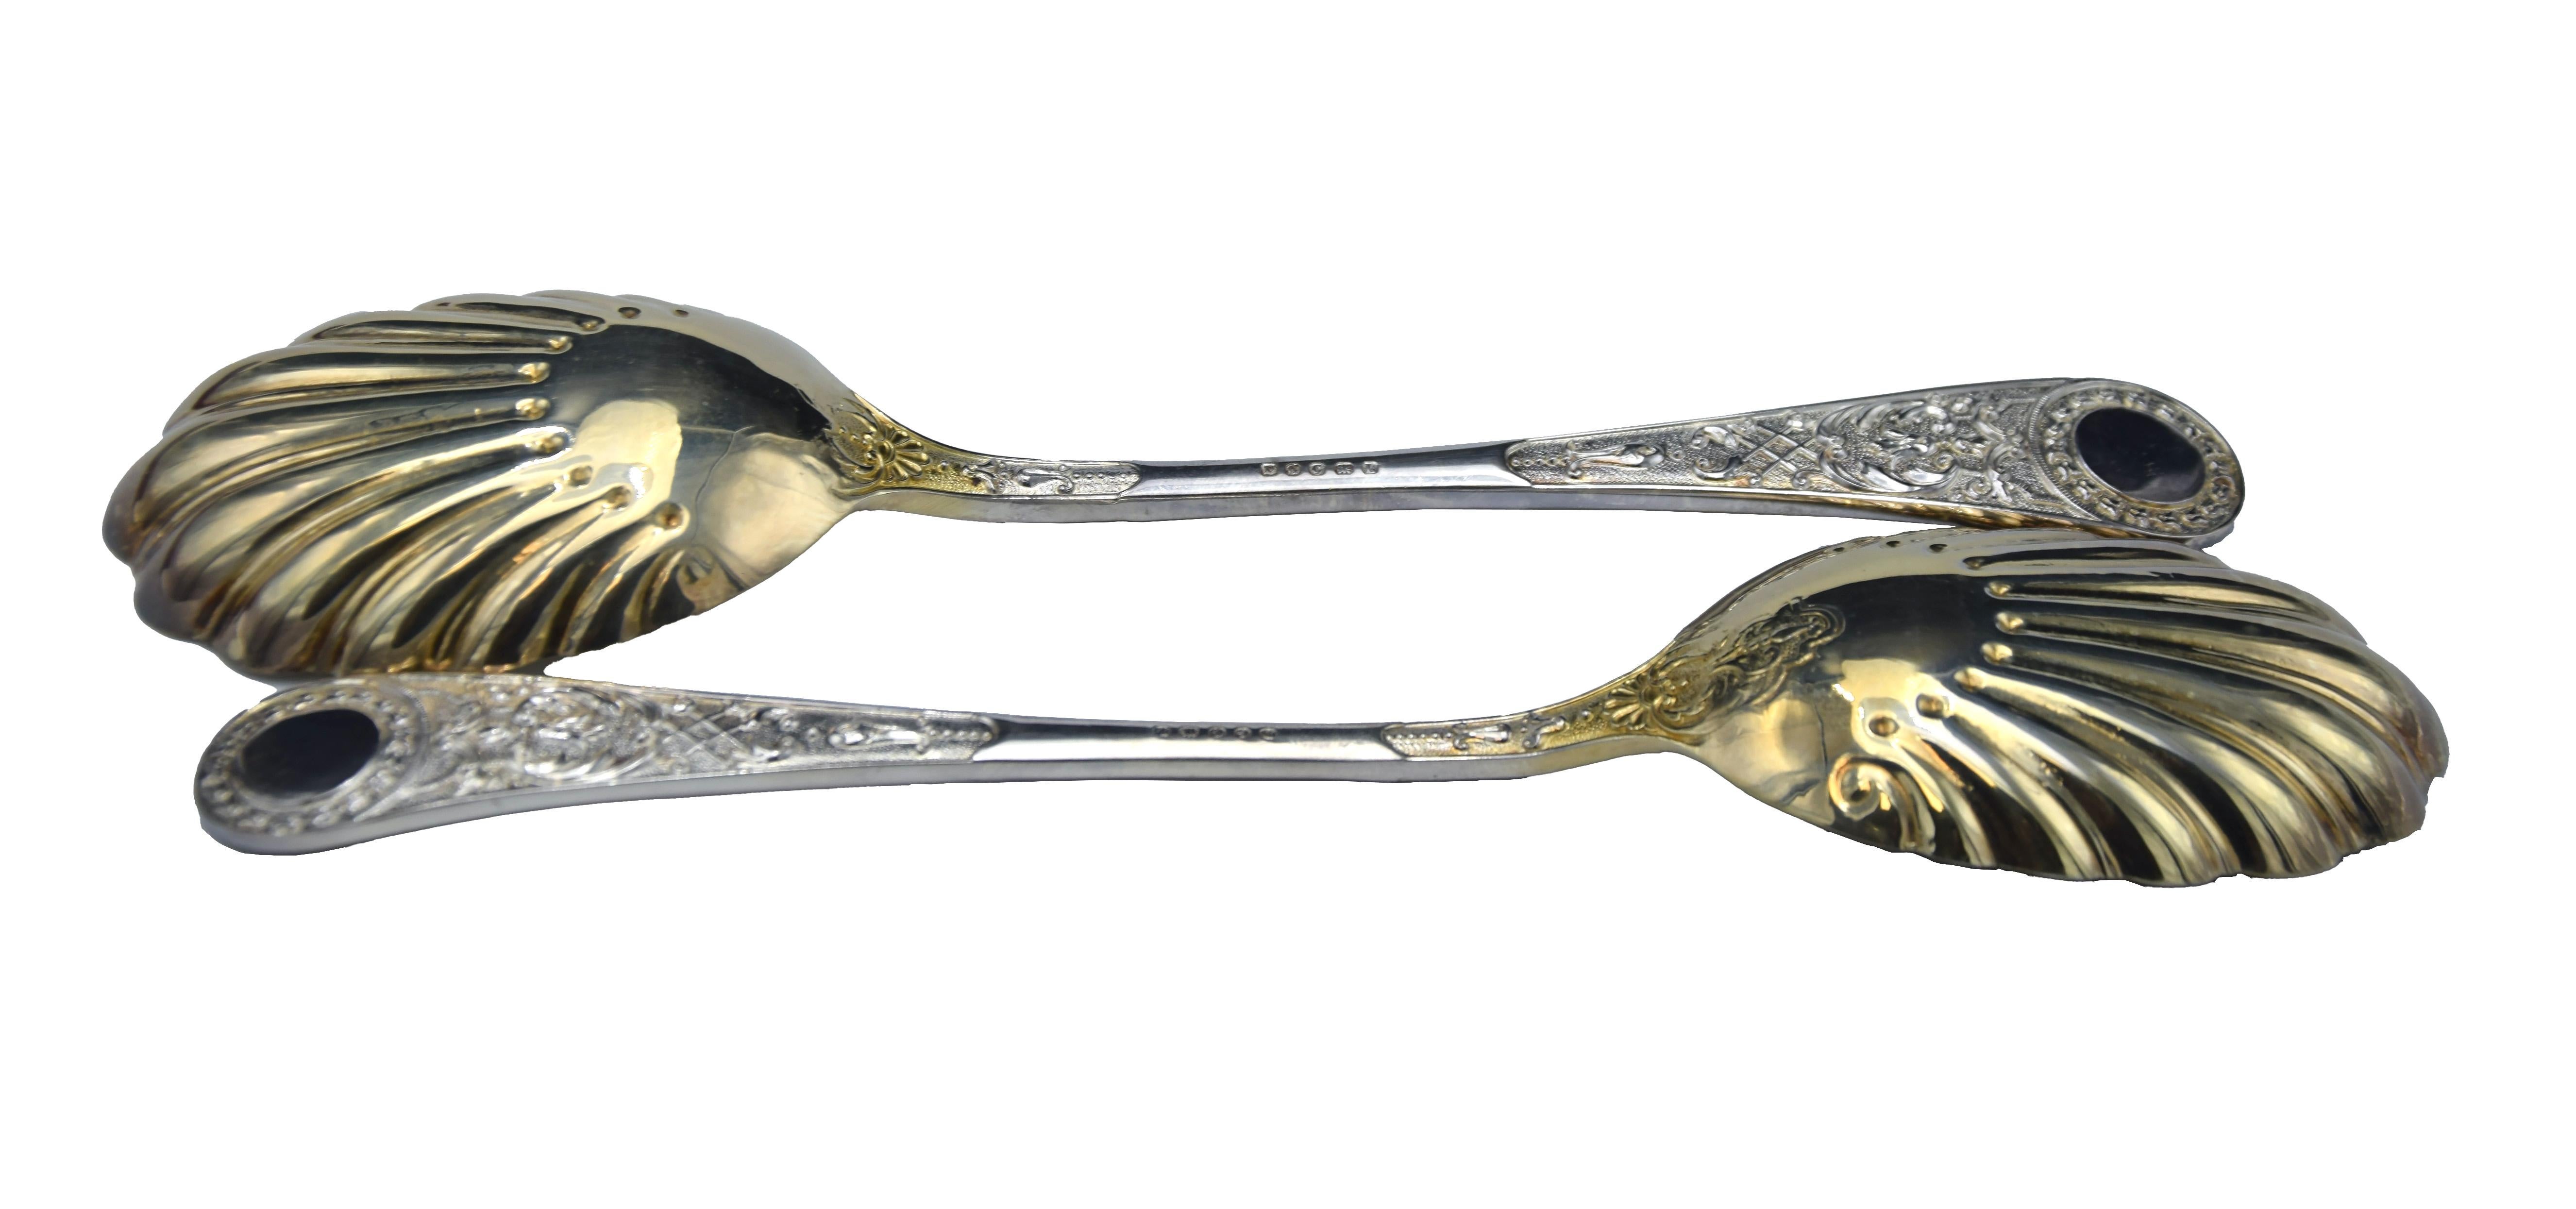 Vintage Silver Serving Cutlery - England Late 19th Century In Good Condition For Sale In Roma, IT